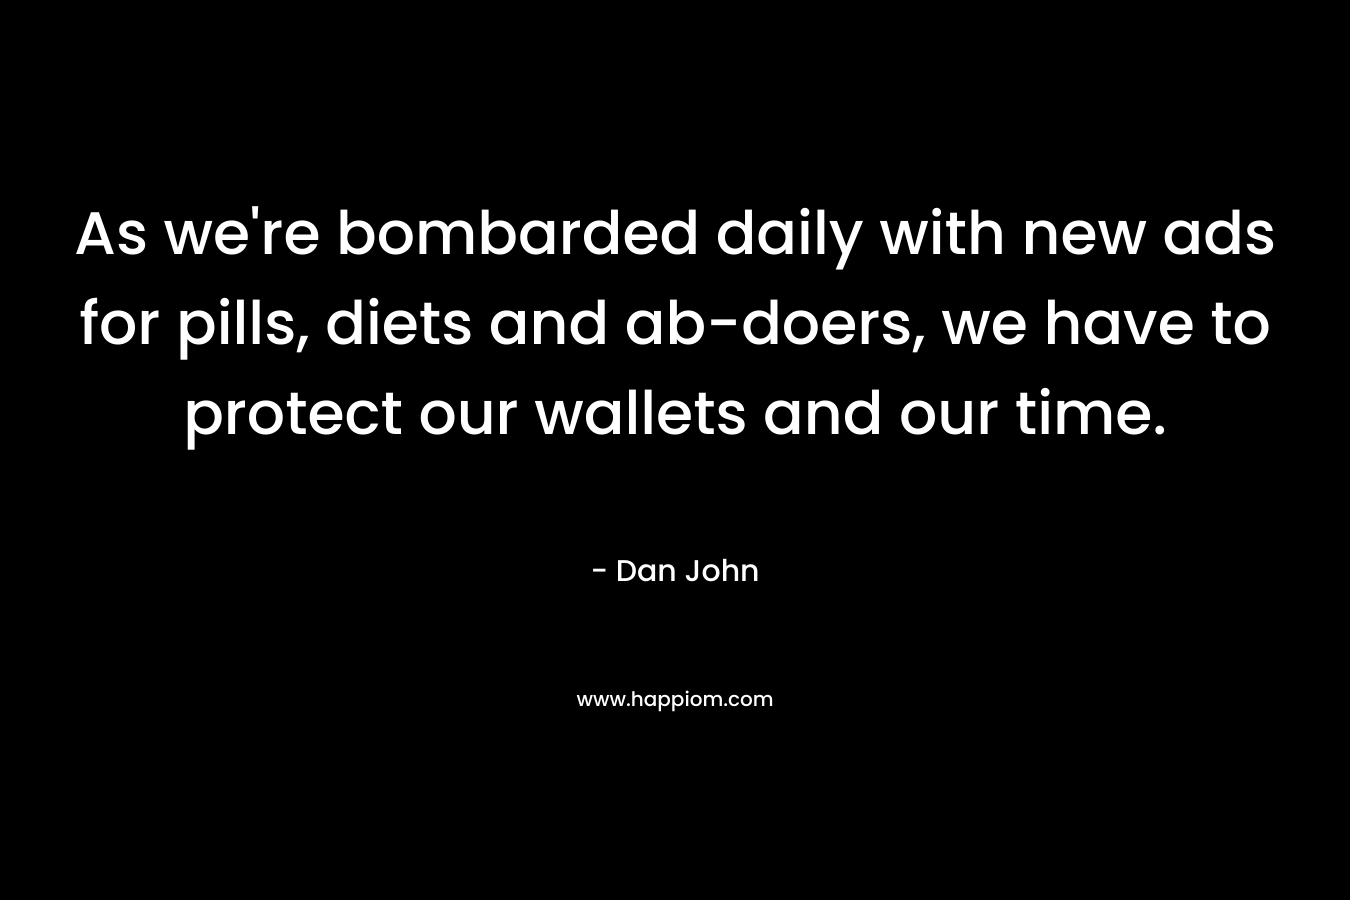 As we’re bombarded daily with new ads for pills, diets and ab-doers, we have to protect our wallets and our time. – Dan John